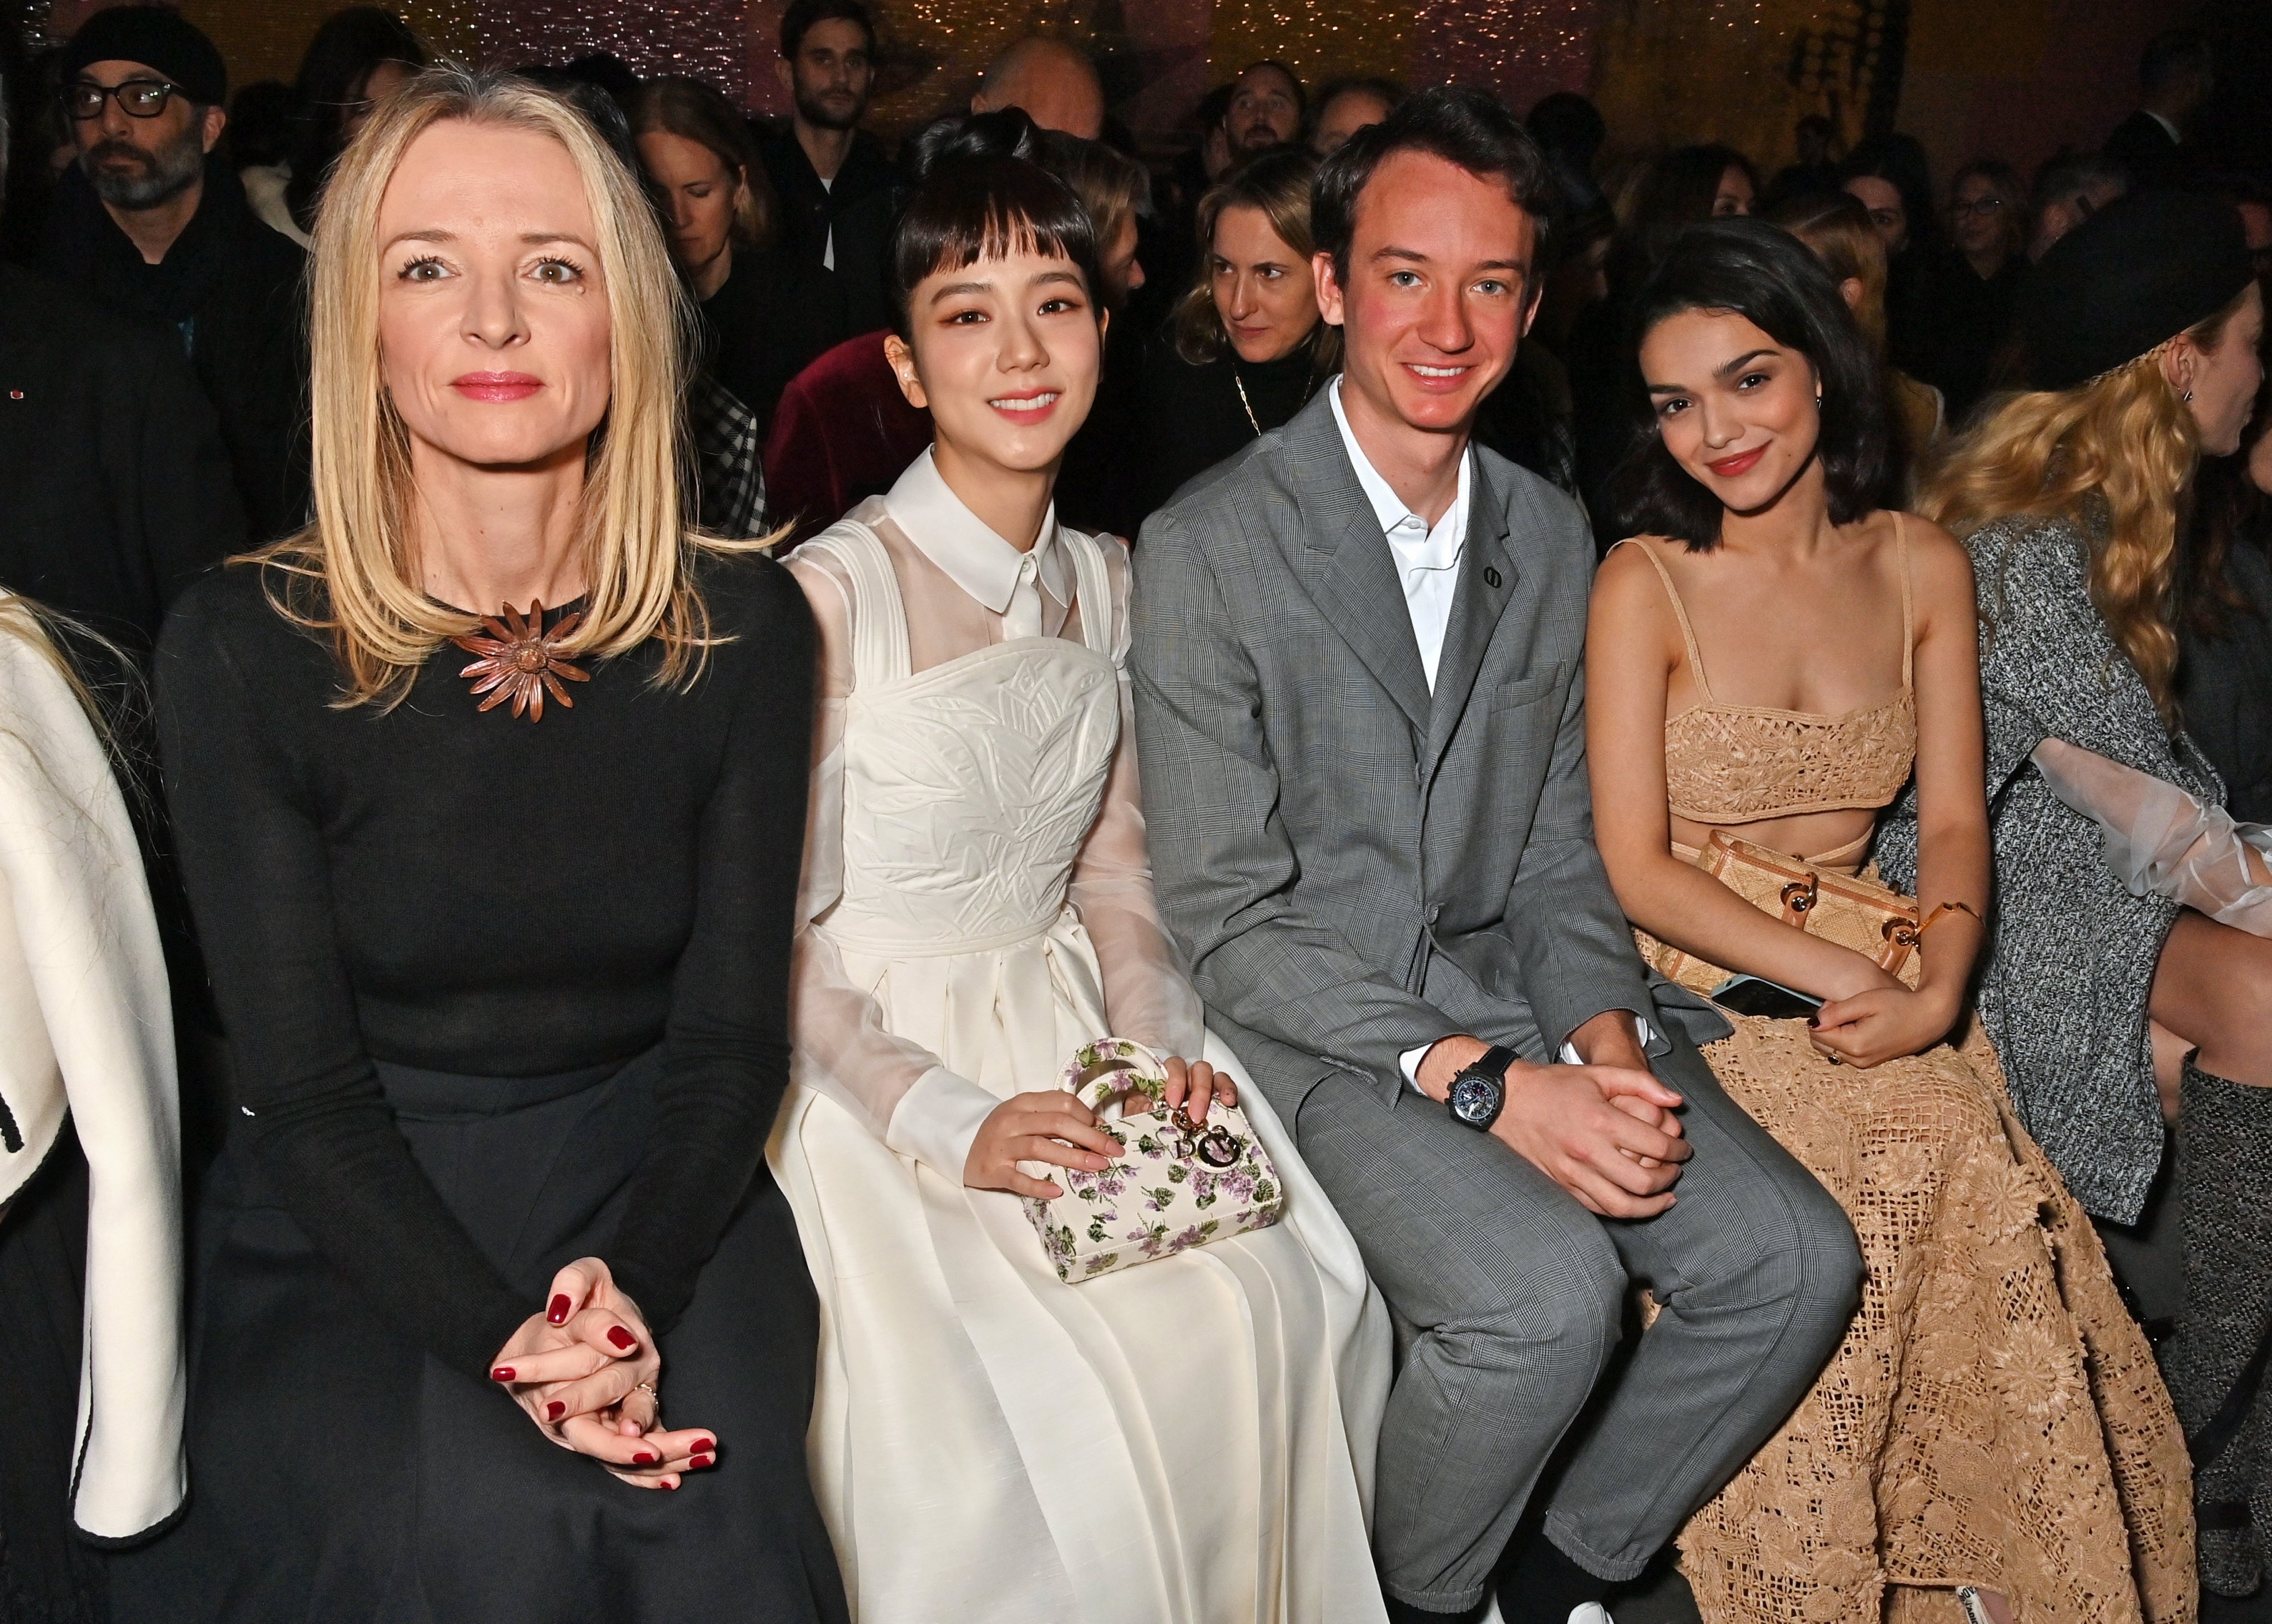 PARIS, FRANCE - JANUARY 23: (L to R) Delphine Arnault, Jisoo, TAG Heuer CEO Frederic Arnault and Rachel Zegler attend the Christian Dior front row during Paris Fashion Week Haute Couture Spring Summer 2023 on January 23, 2023 in Paris, France. (Photo by David M. Benett/Dave Benett/Getty Images)